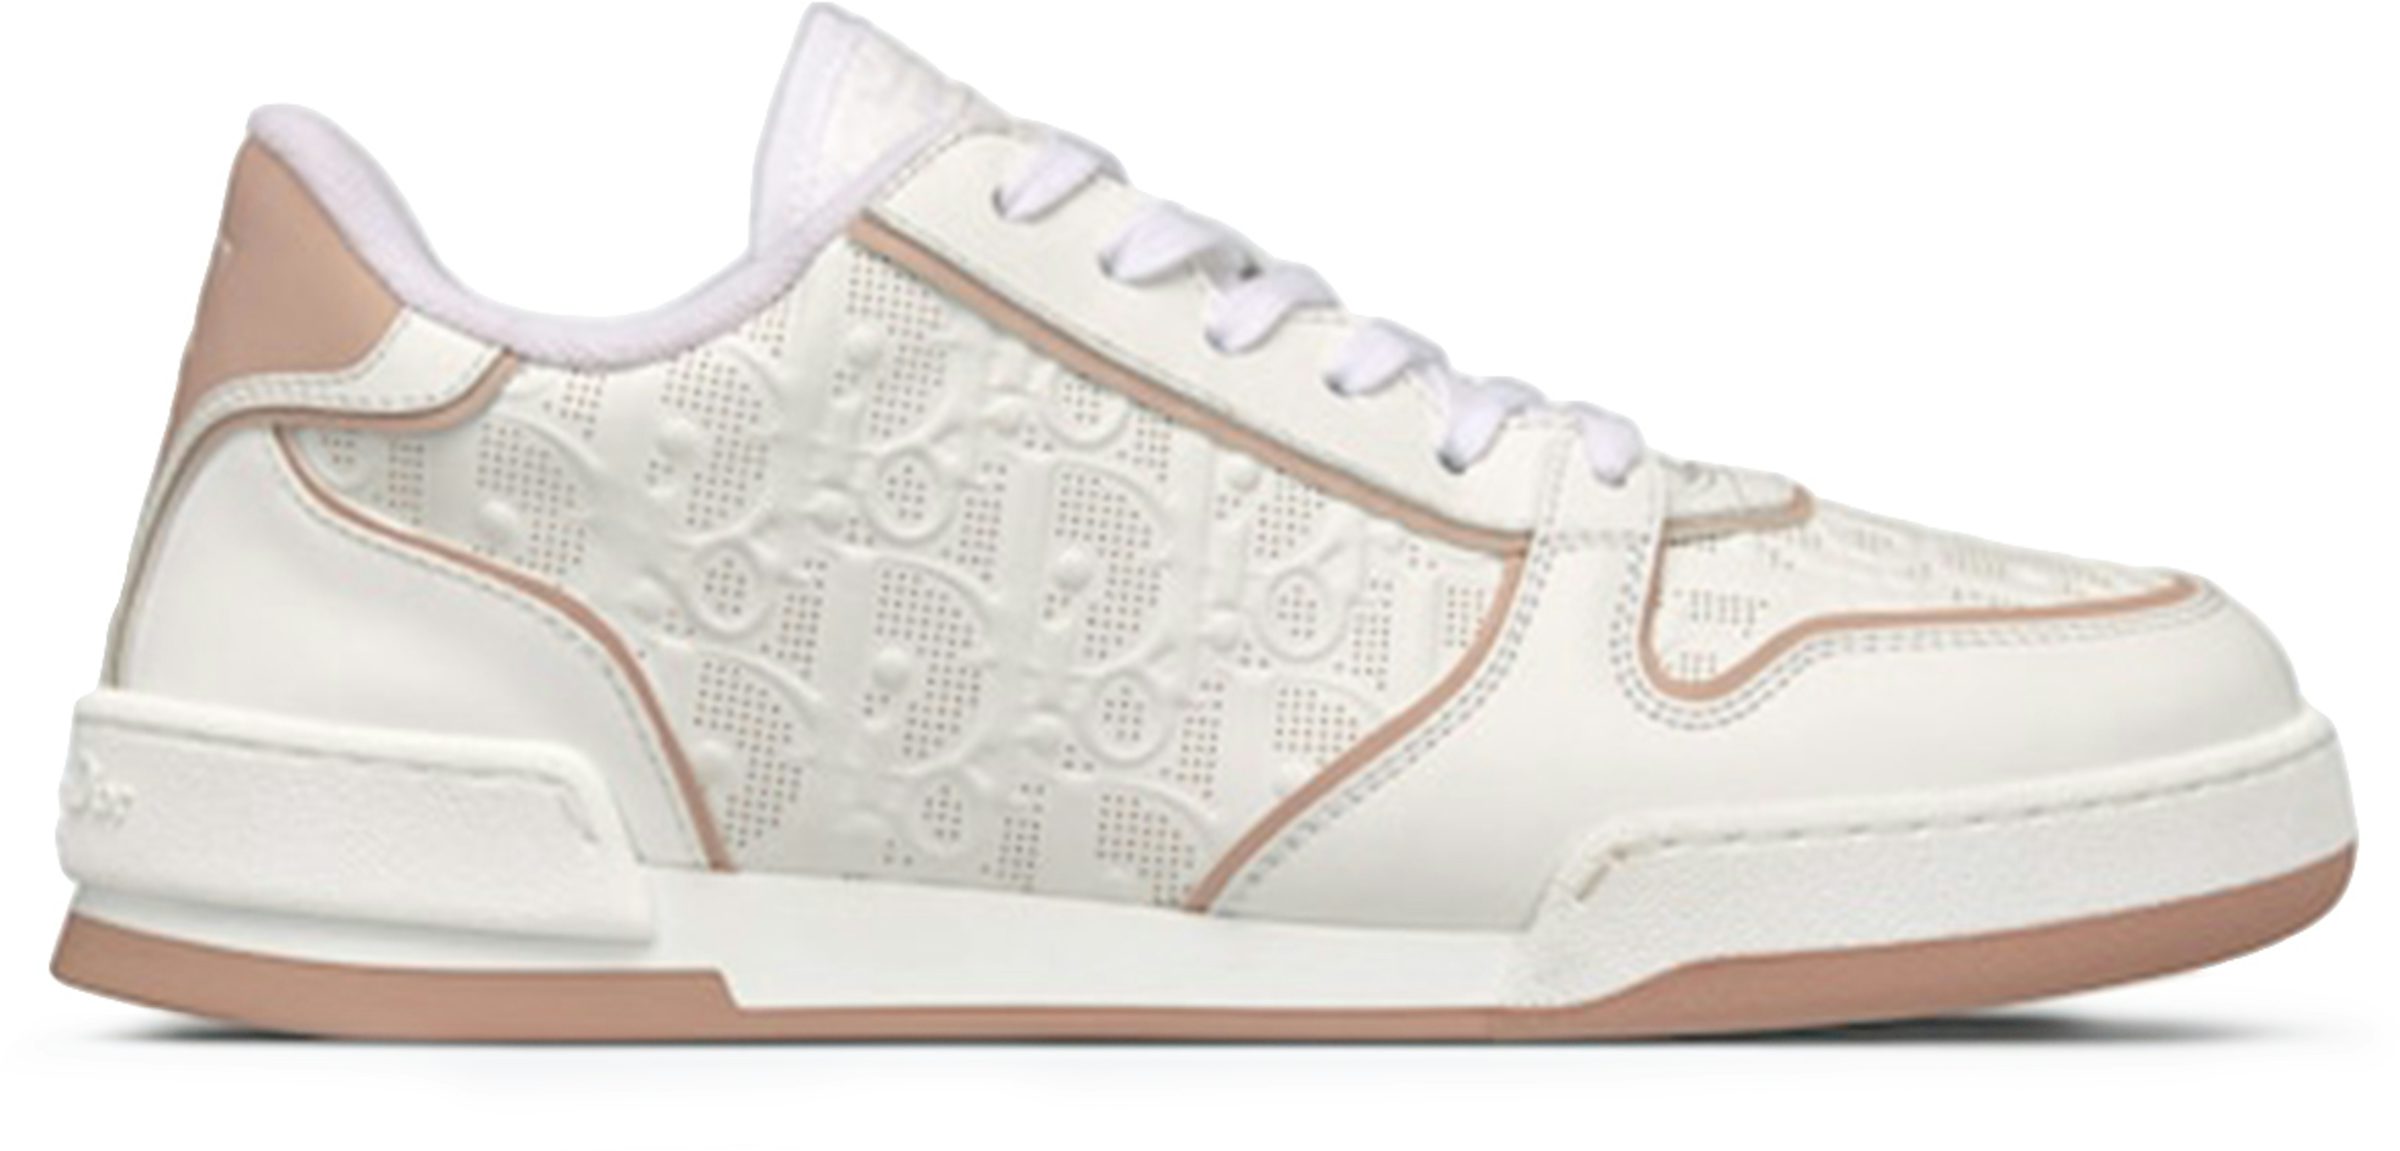 Dior One Sneaker White and Fuchsia Dior Oblique Perforated Calfskin